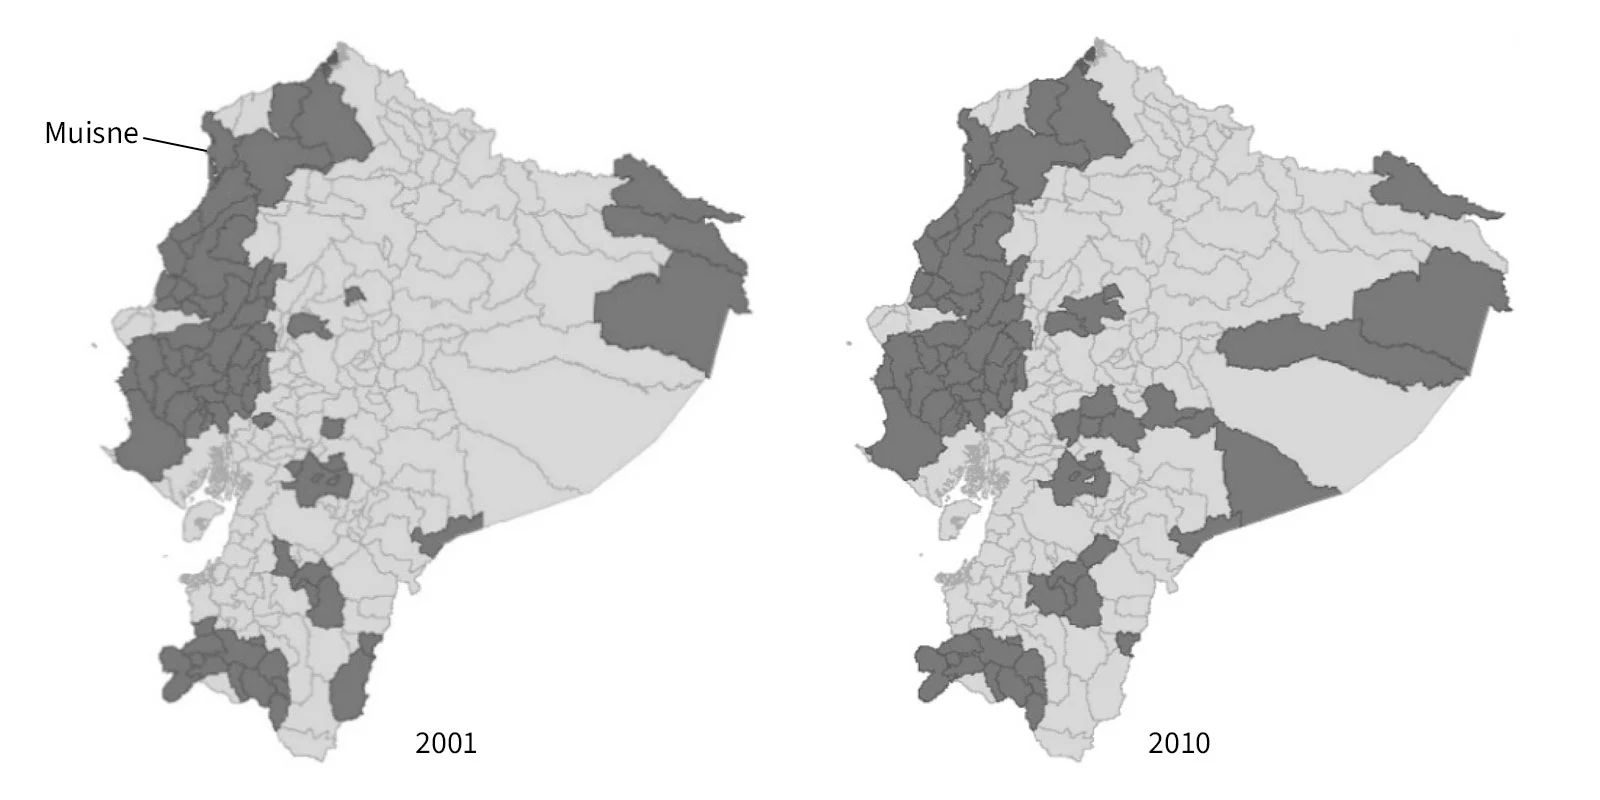 Figure 13. Location of municipalities in a poverty trap condition in 2001 and 2010. 2